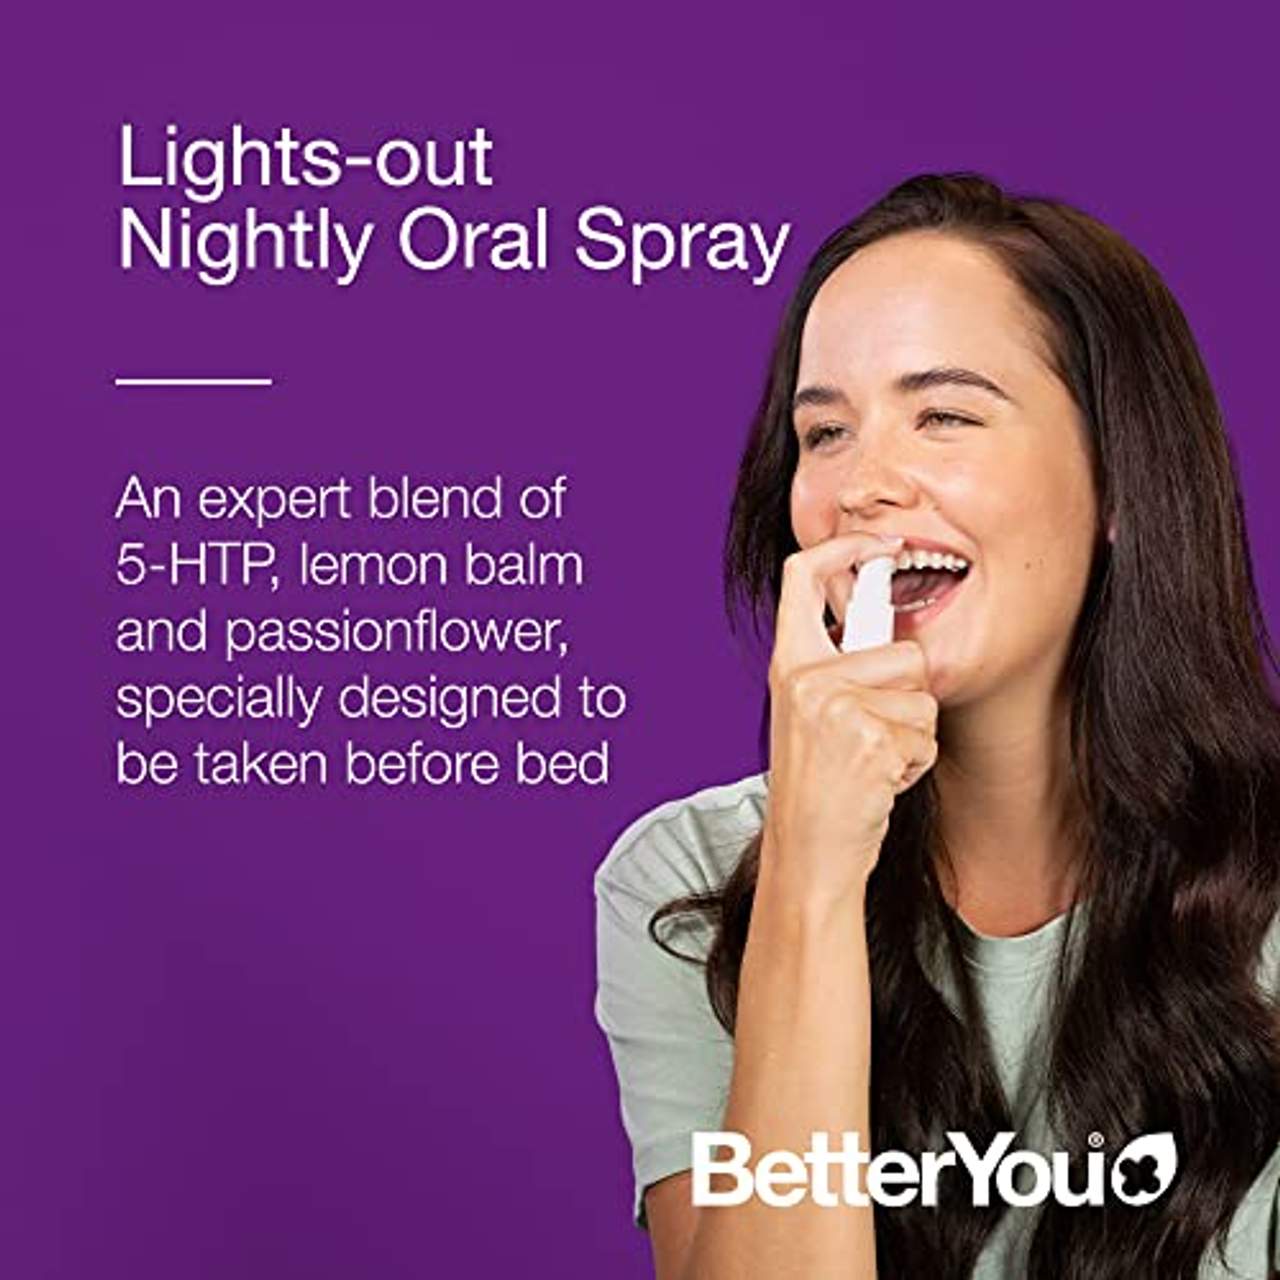 BetterYou Lights-Out 5-HTP Nightly Oral Spray